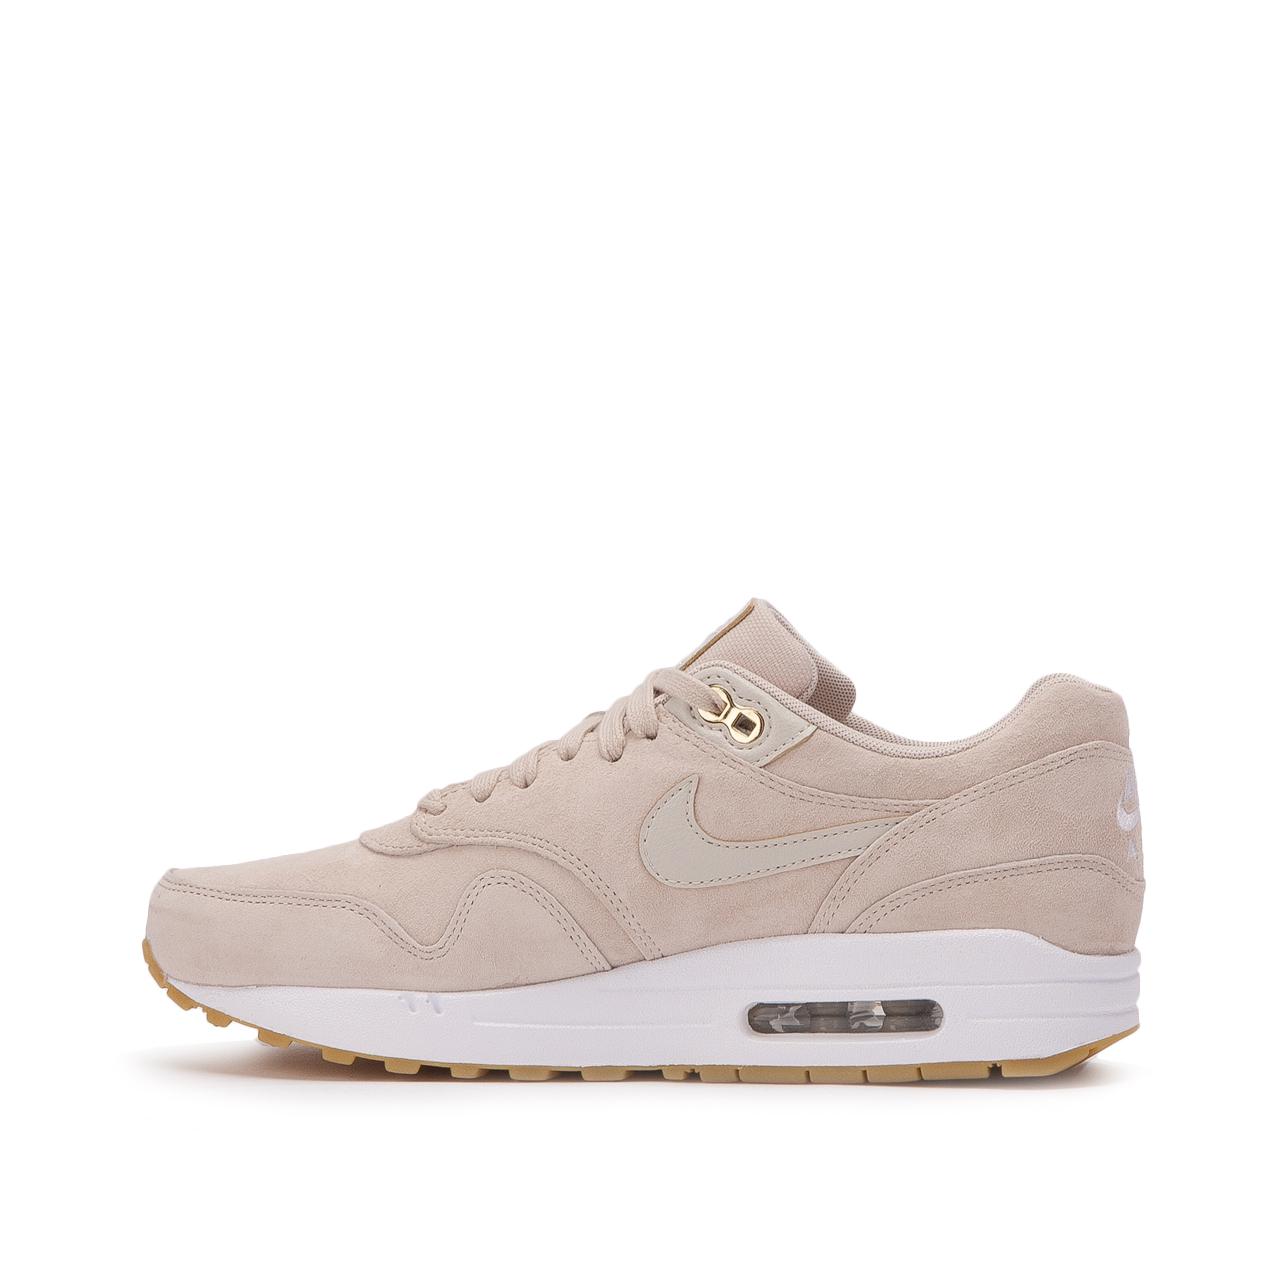 Nike Suede Nike Wmns Air Max 1 Sd in Pink for Men - Lyst